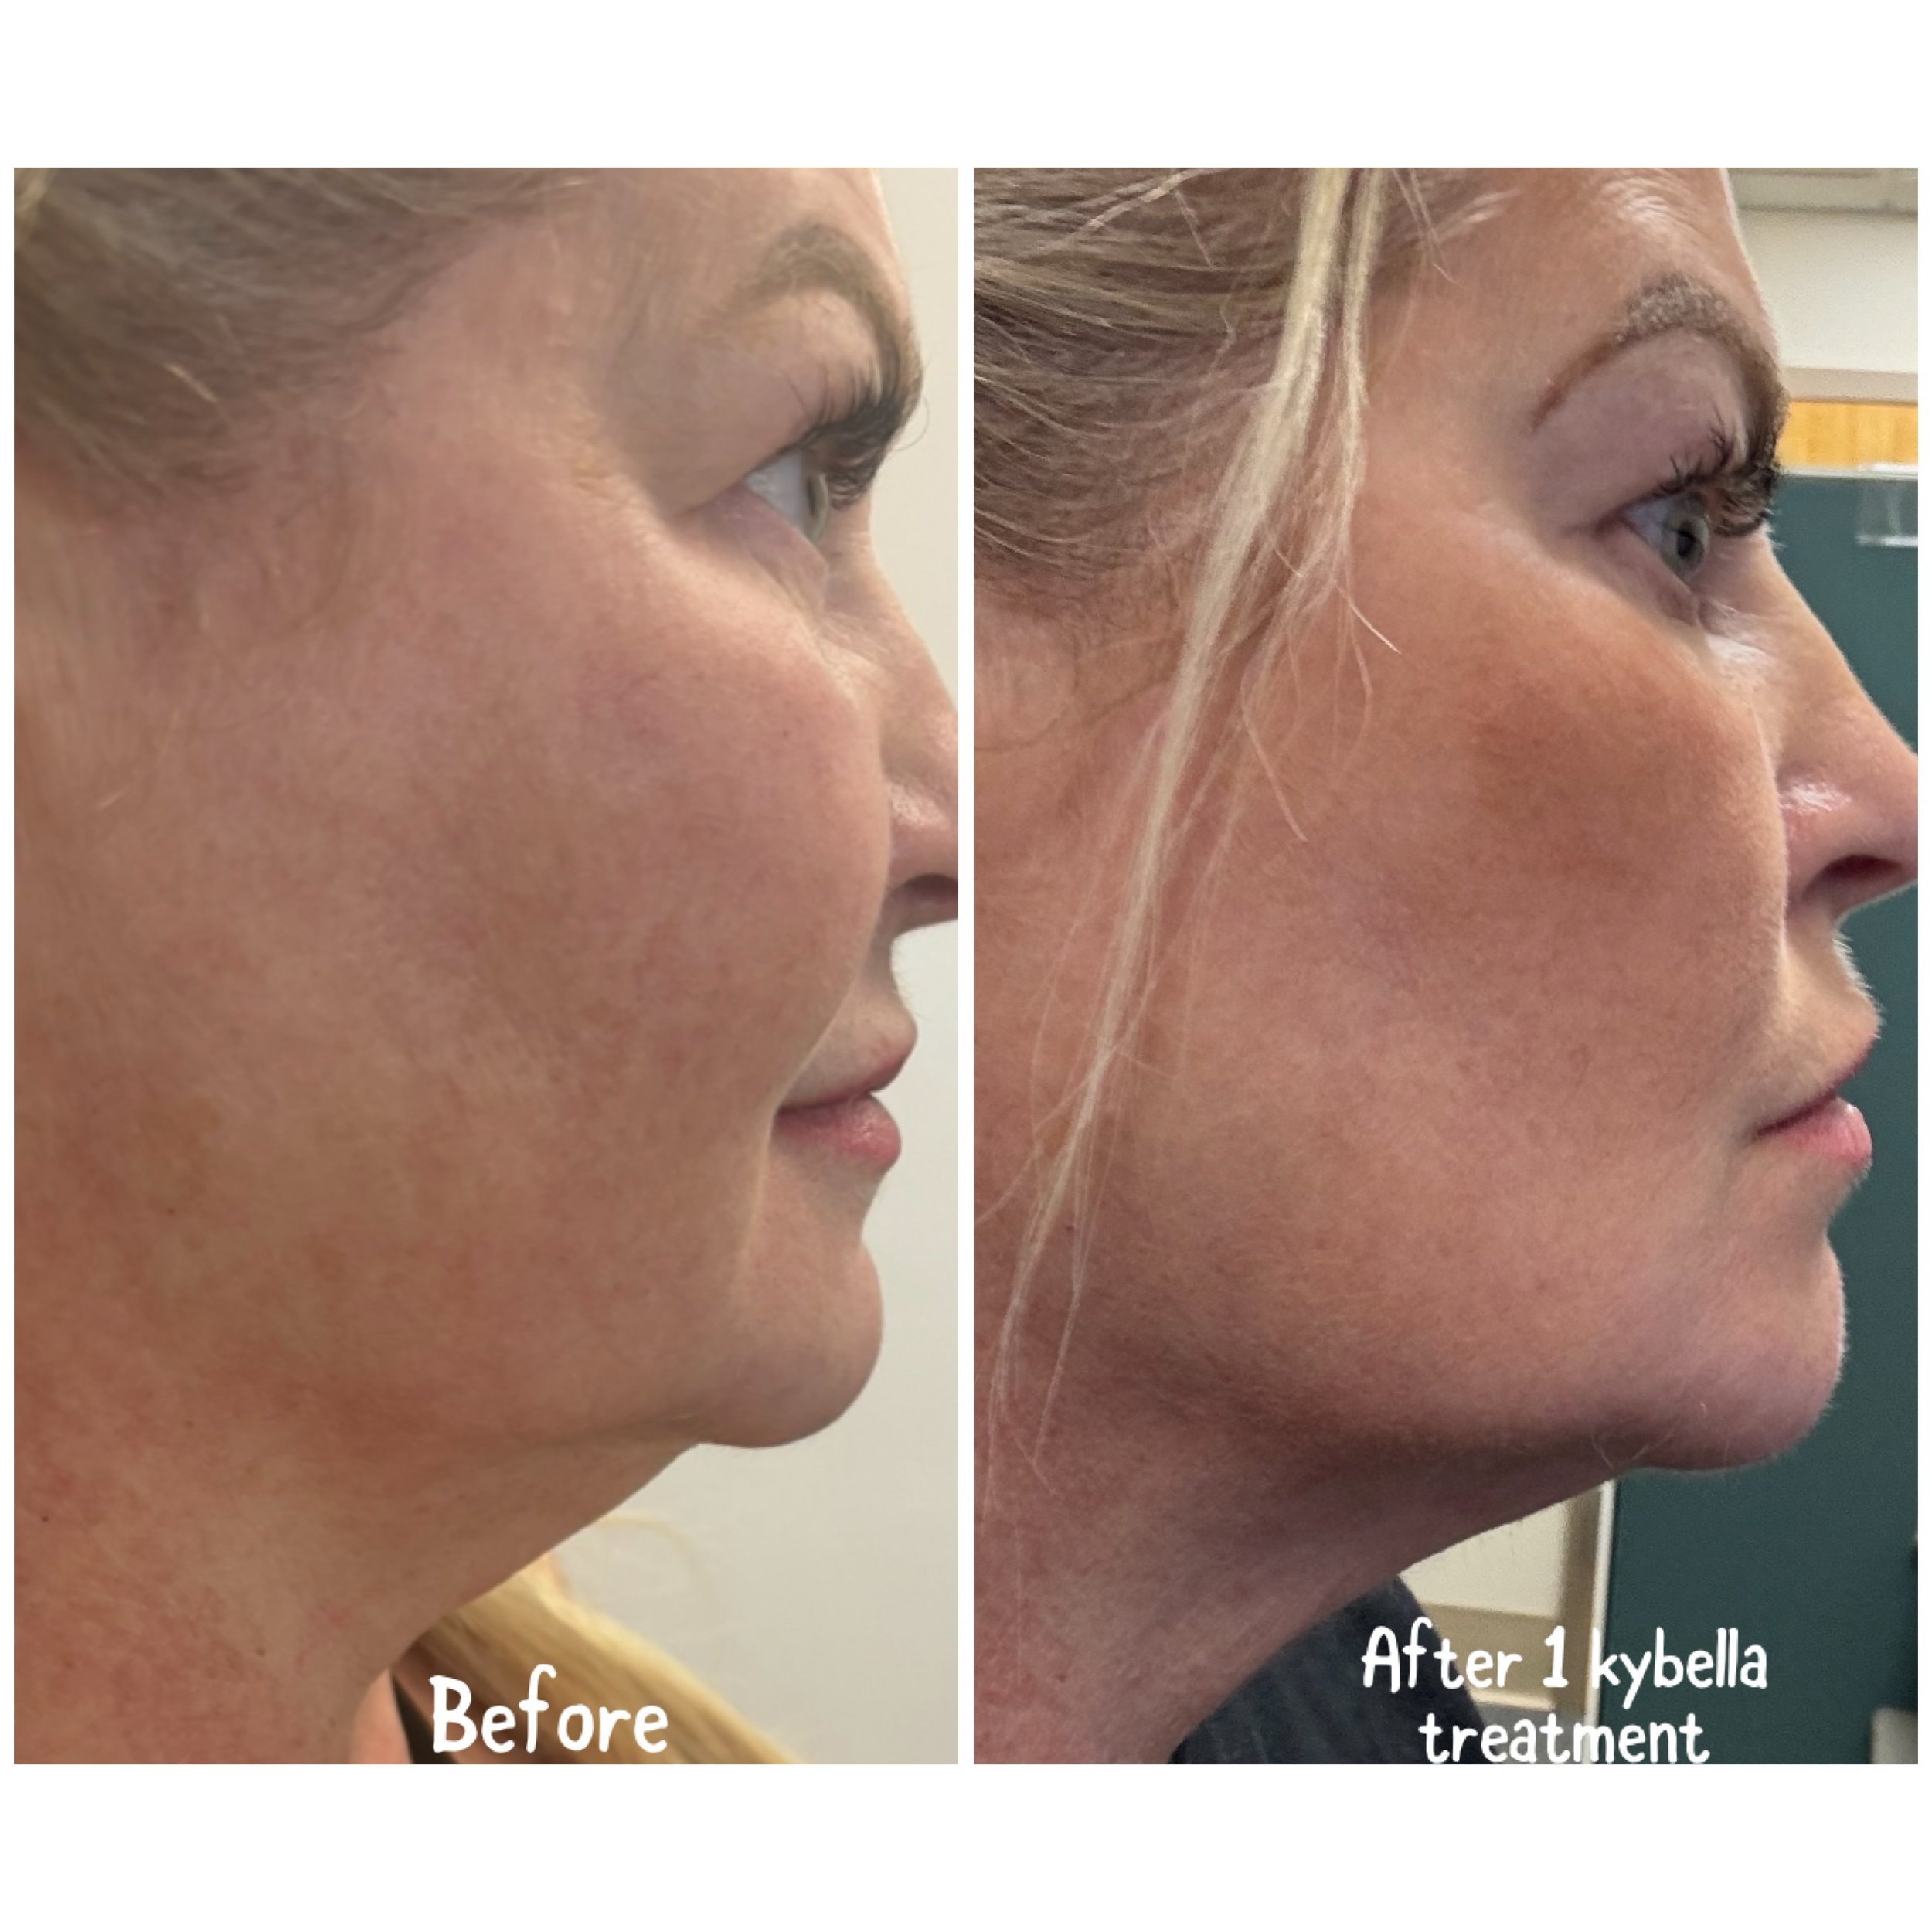 Before and after one Kybella treatment! Kybella destroys fat cells in the injected area and is often used to eliminate a &ldquo;double chin.&rdquo; Book your appointment now and permanently melt those fat cells away!